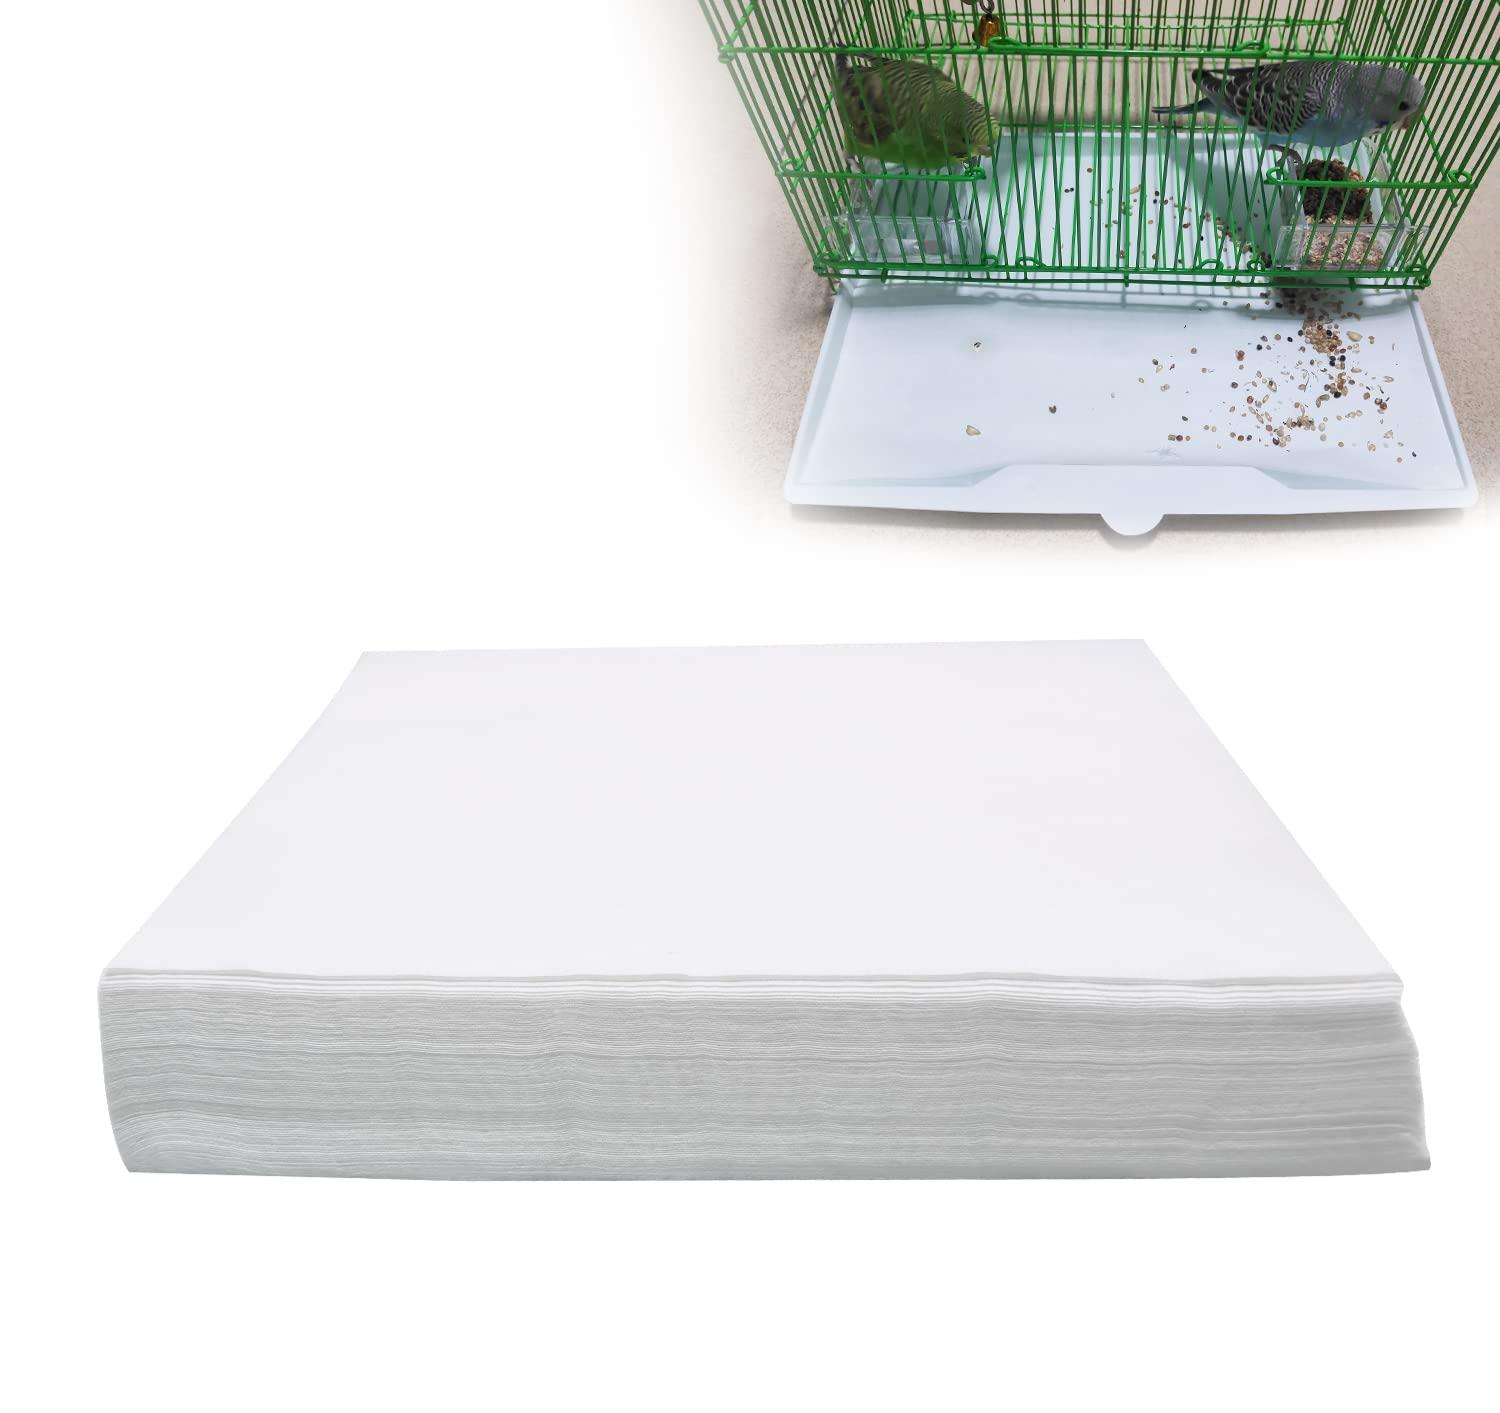 RUBYQ Bird cage Liner Papers, 100200 Sheets Non-Woven Bird cage Liners, Precut Absorbent Bird cage Paper Liners Pet Animal cages cushion for Bird Parrot